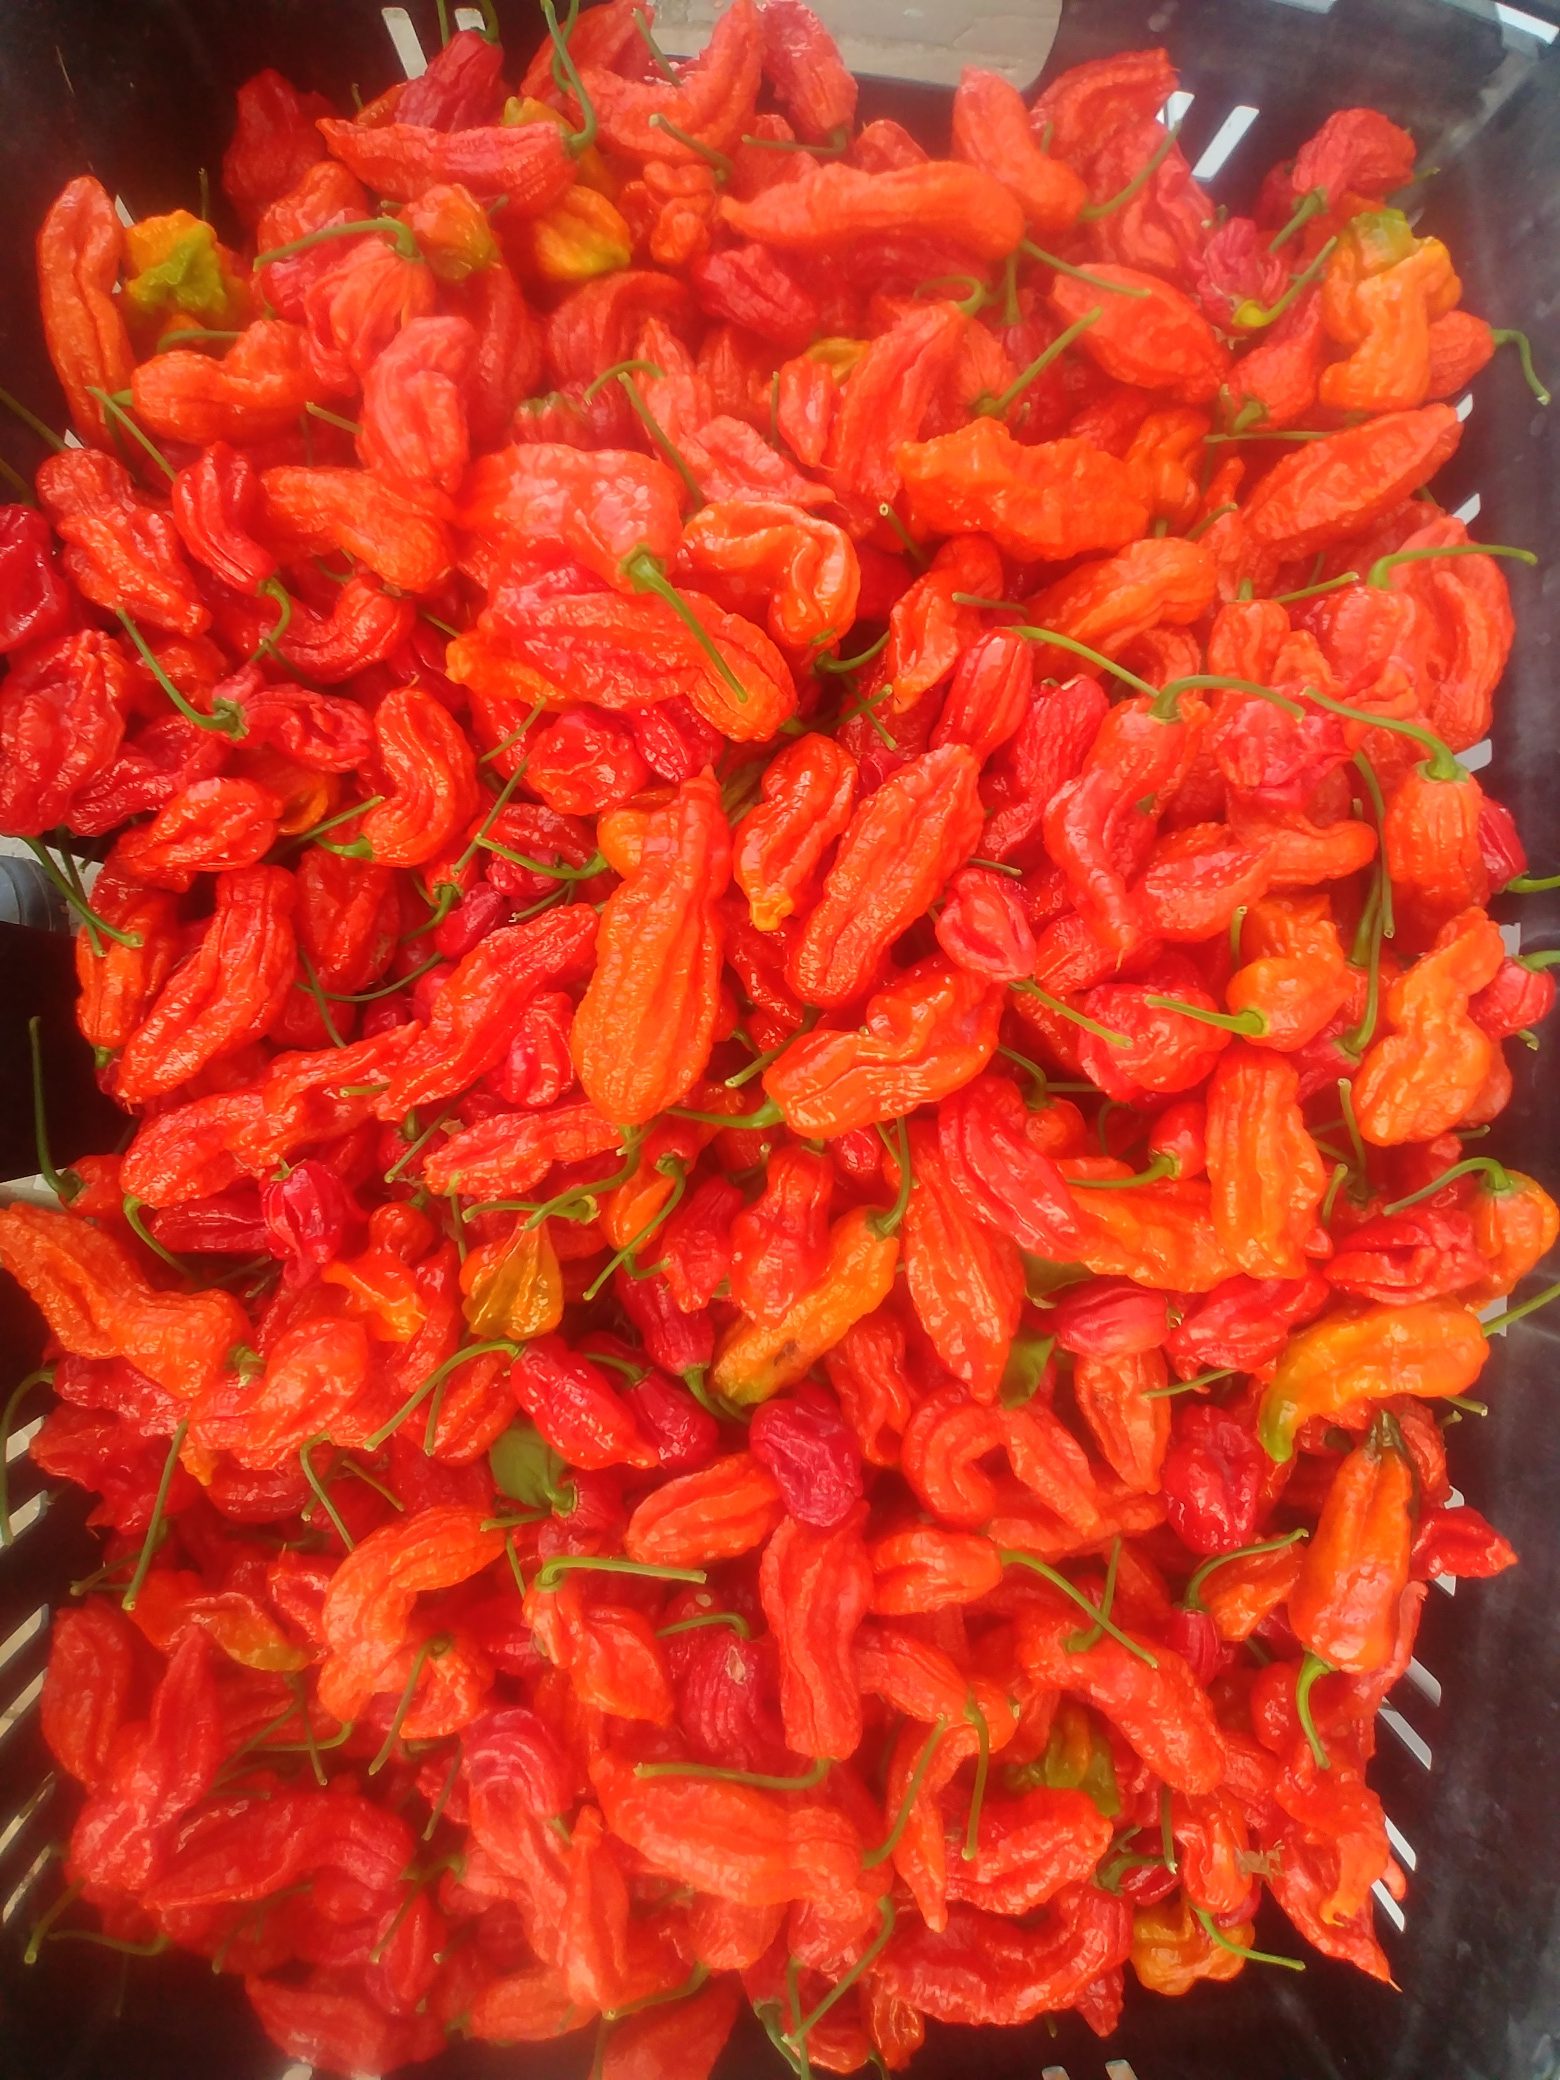 Picture of a full crate of red Bhut Jolokia Ghost Chilli Peppers.